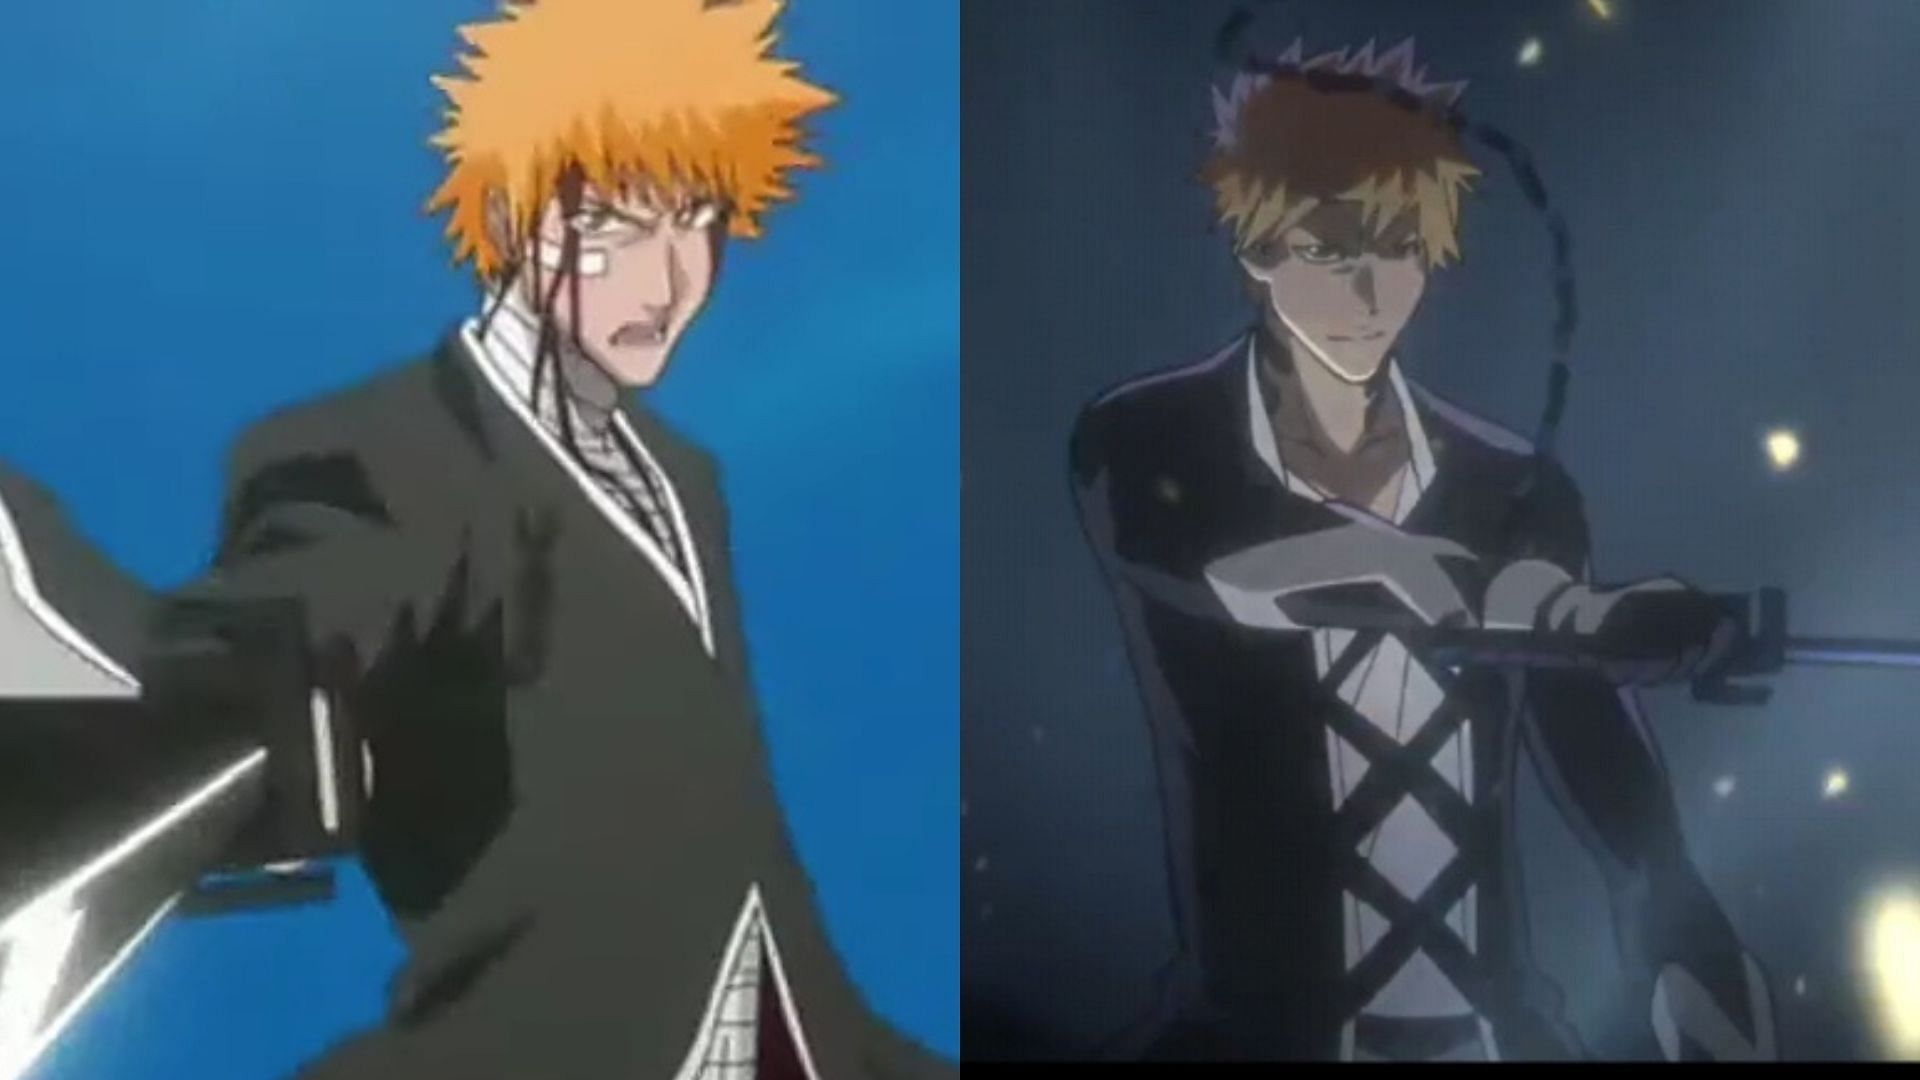 Bleach: 5 Zanpakuto Who Get Along With Their Shinigami (& 5 Who Don't)